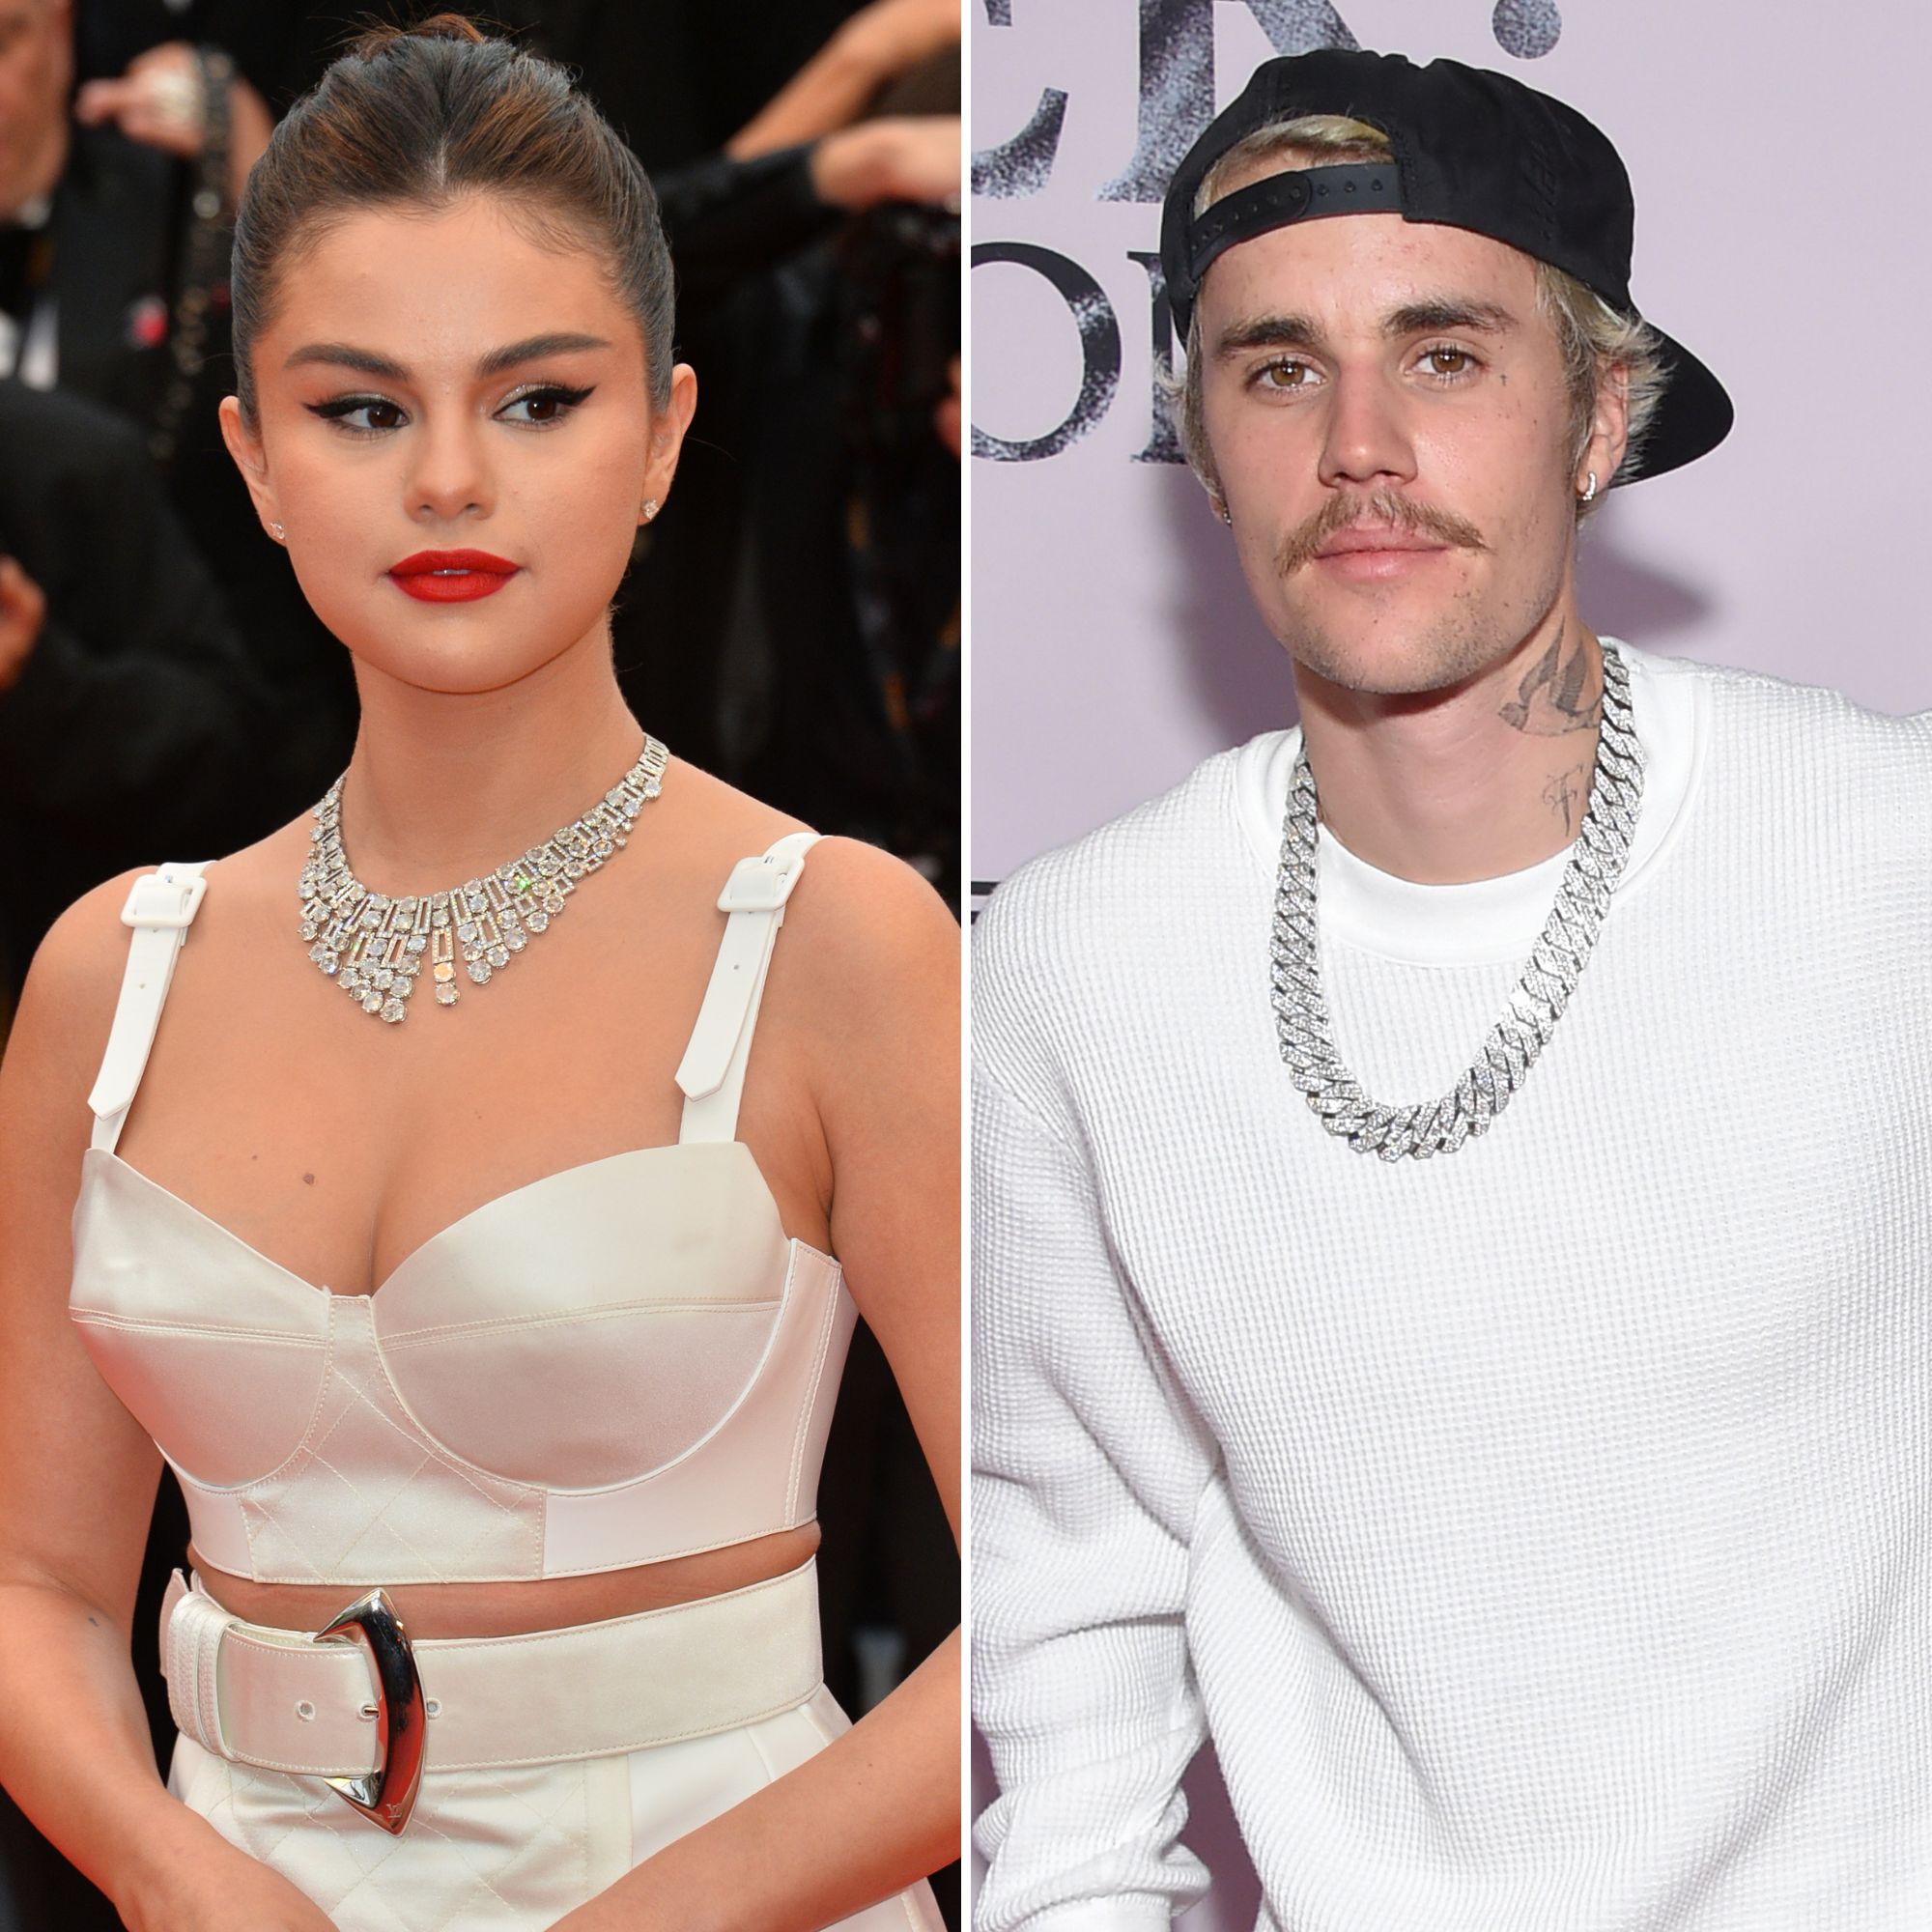 What Selena Gomez, Justin Bieber Have Said About Each Other